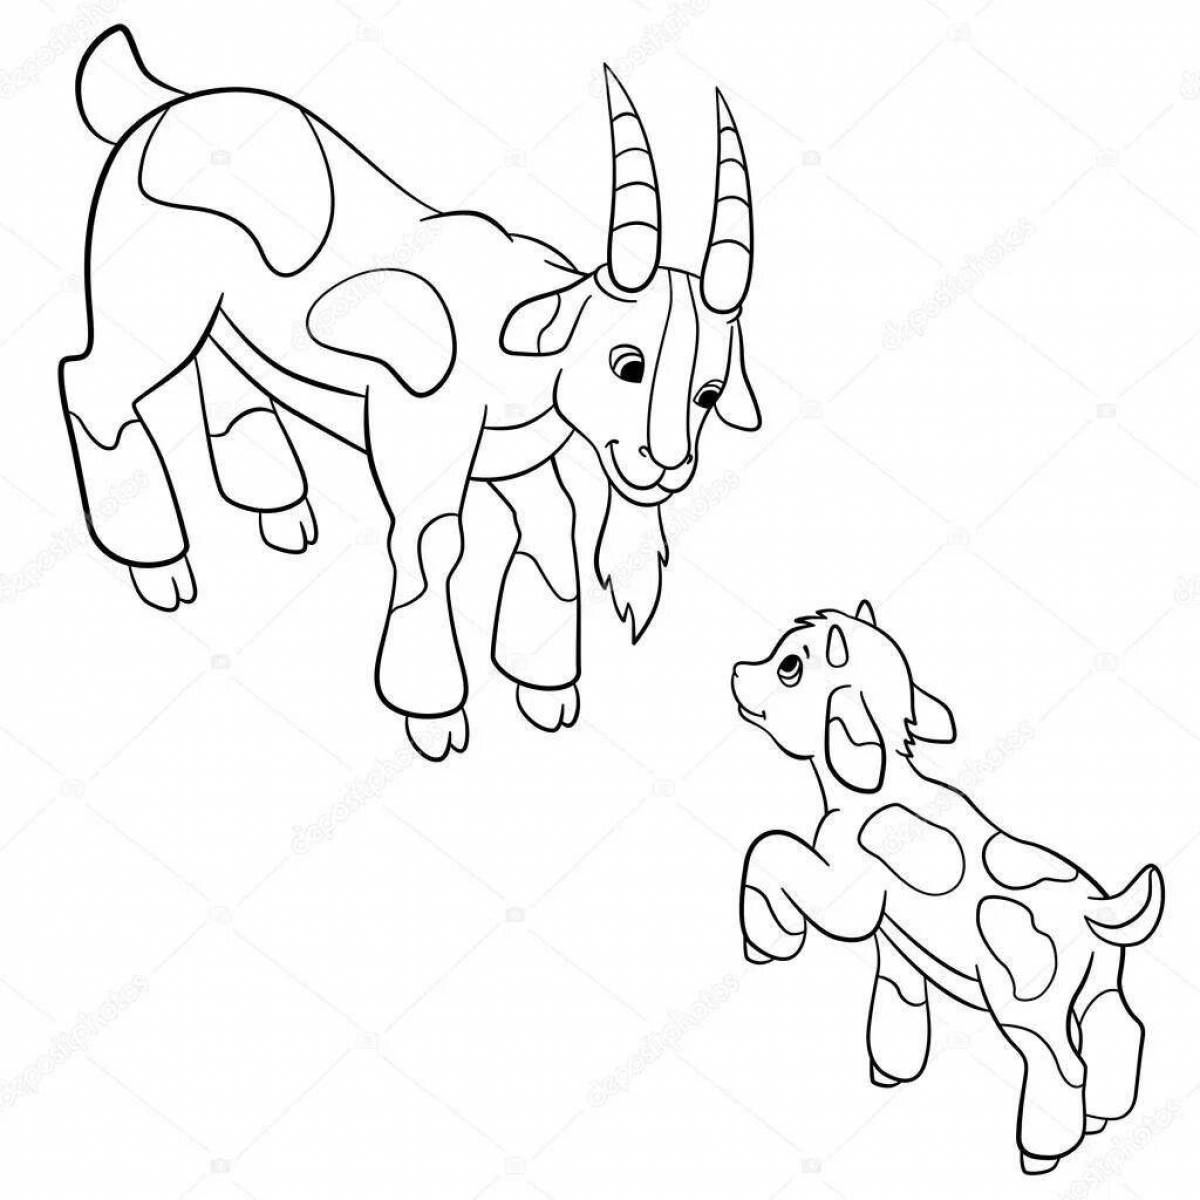 Creative goat coloring book for 5-6 year olds